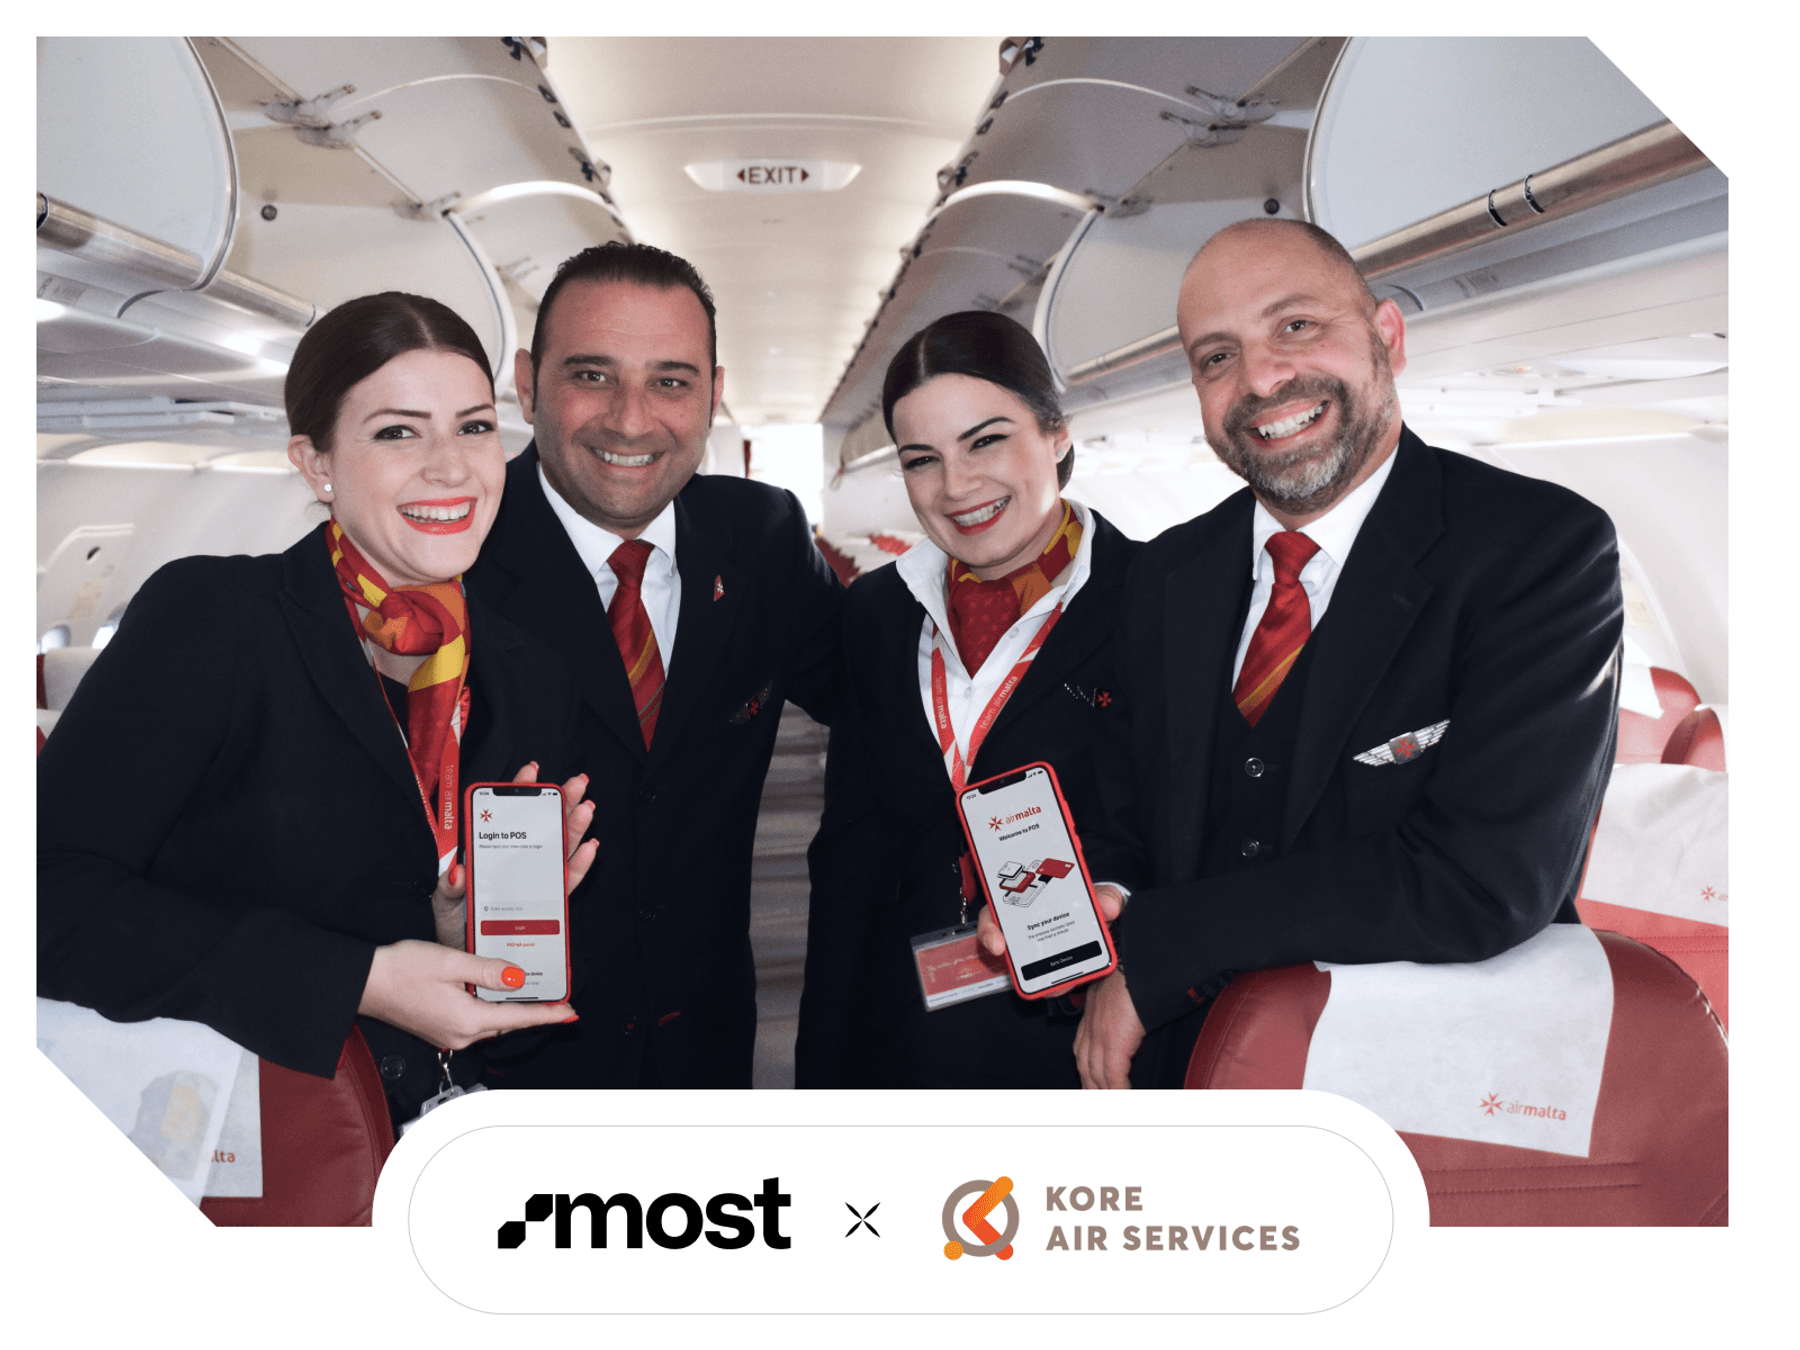 Kore Air Services selects MOST to support launch of onboard retail services for Air Malta